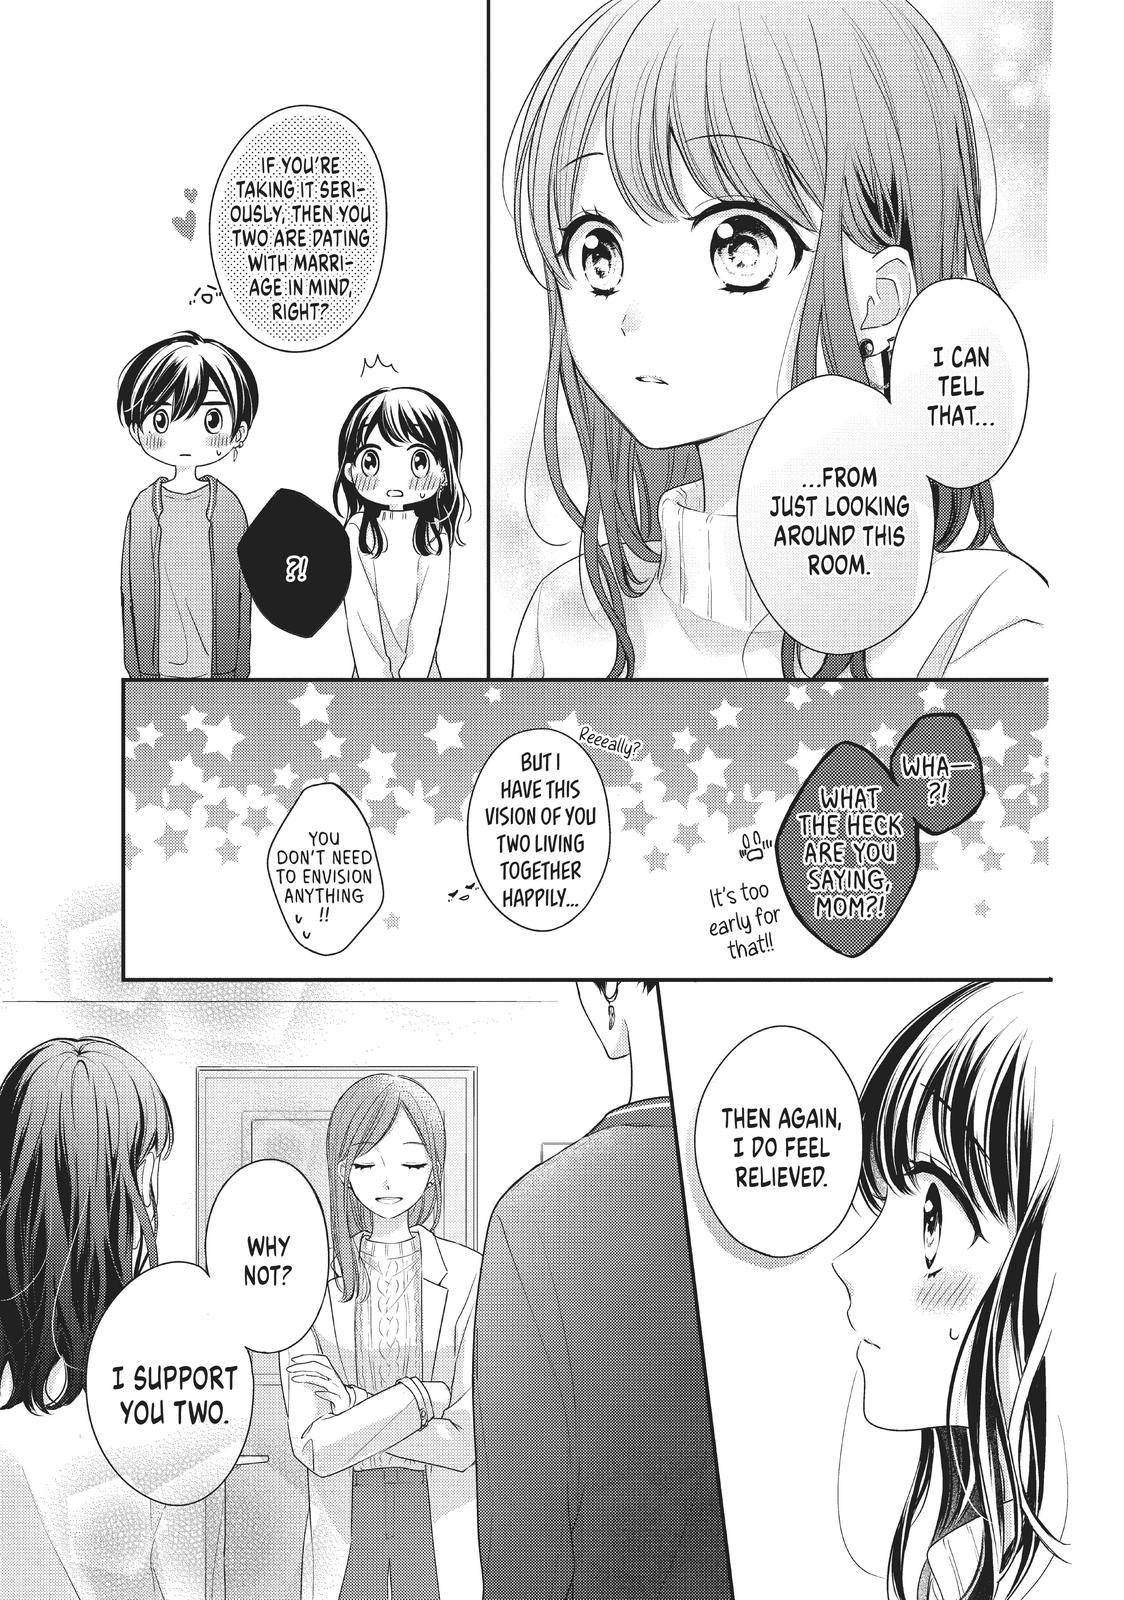 Chihiro-kun Only Has Eyes for Me - chapter 14 - #5